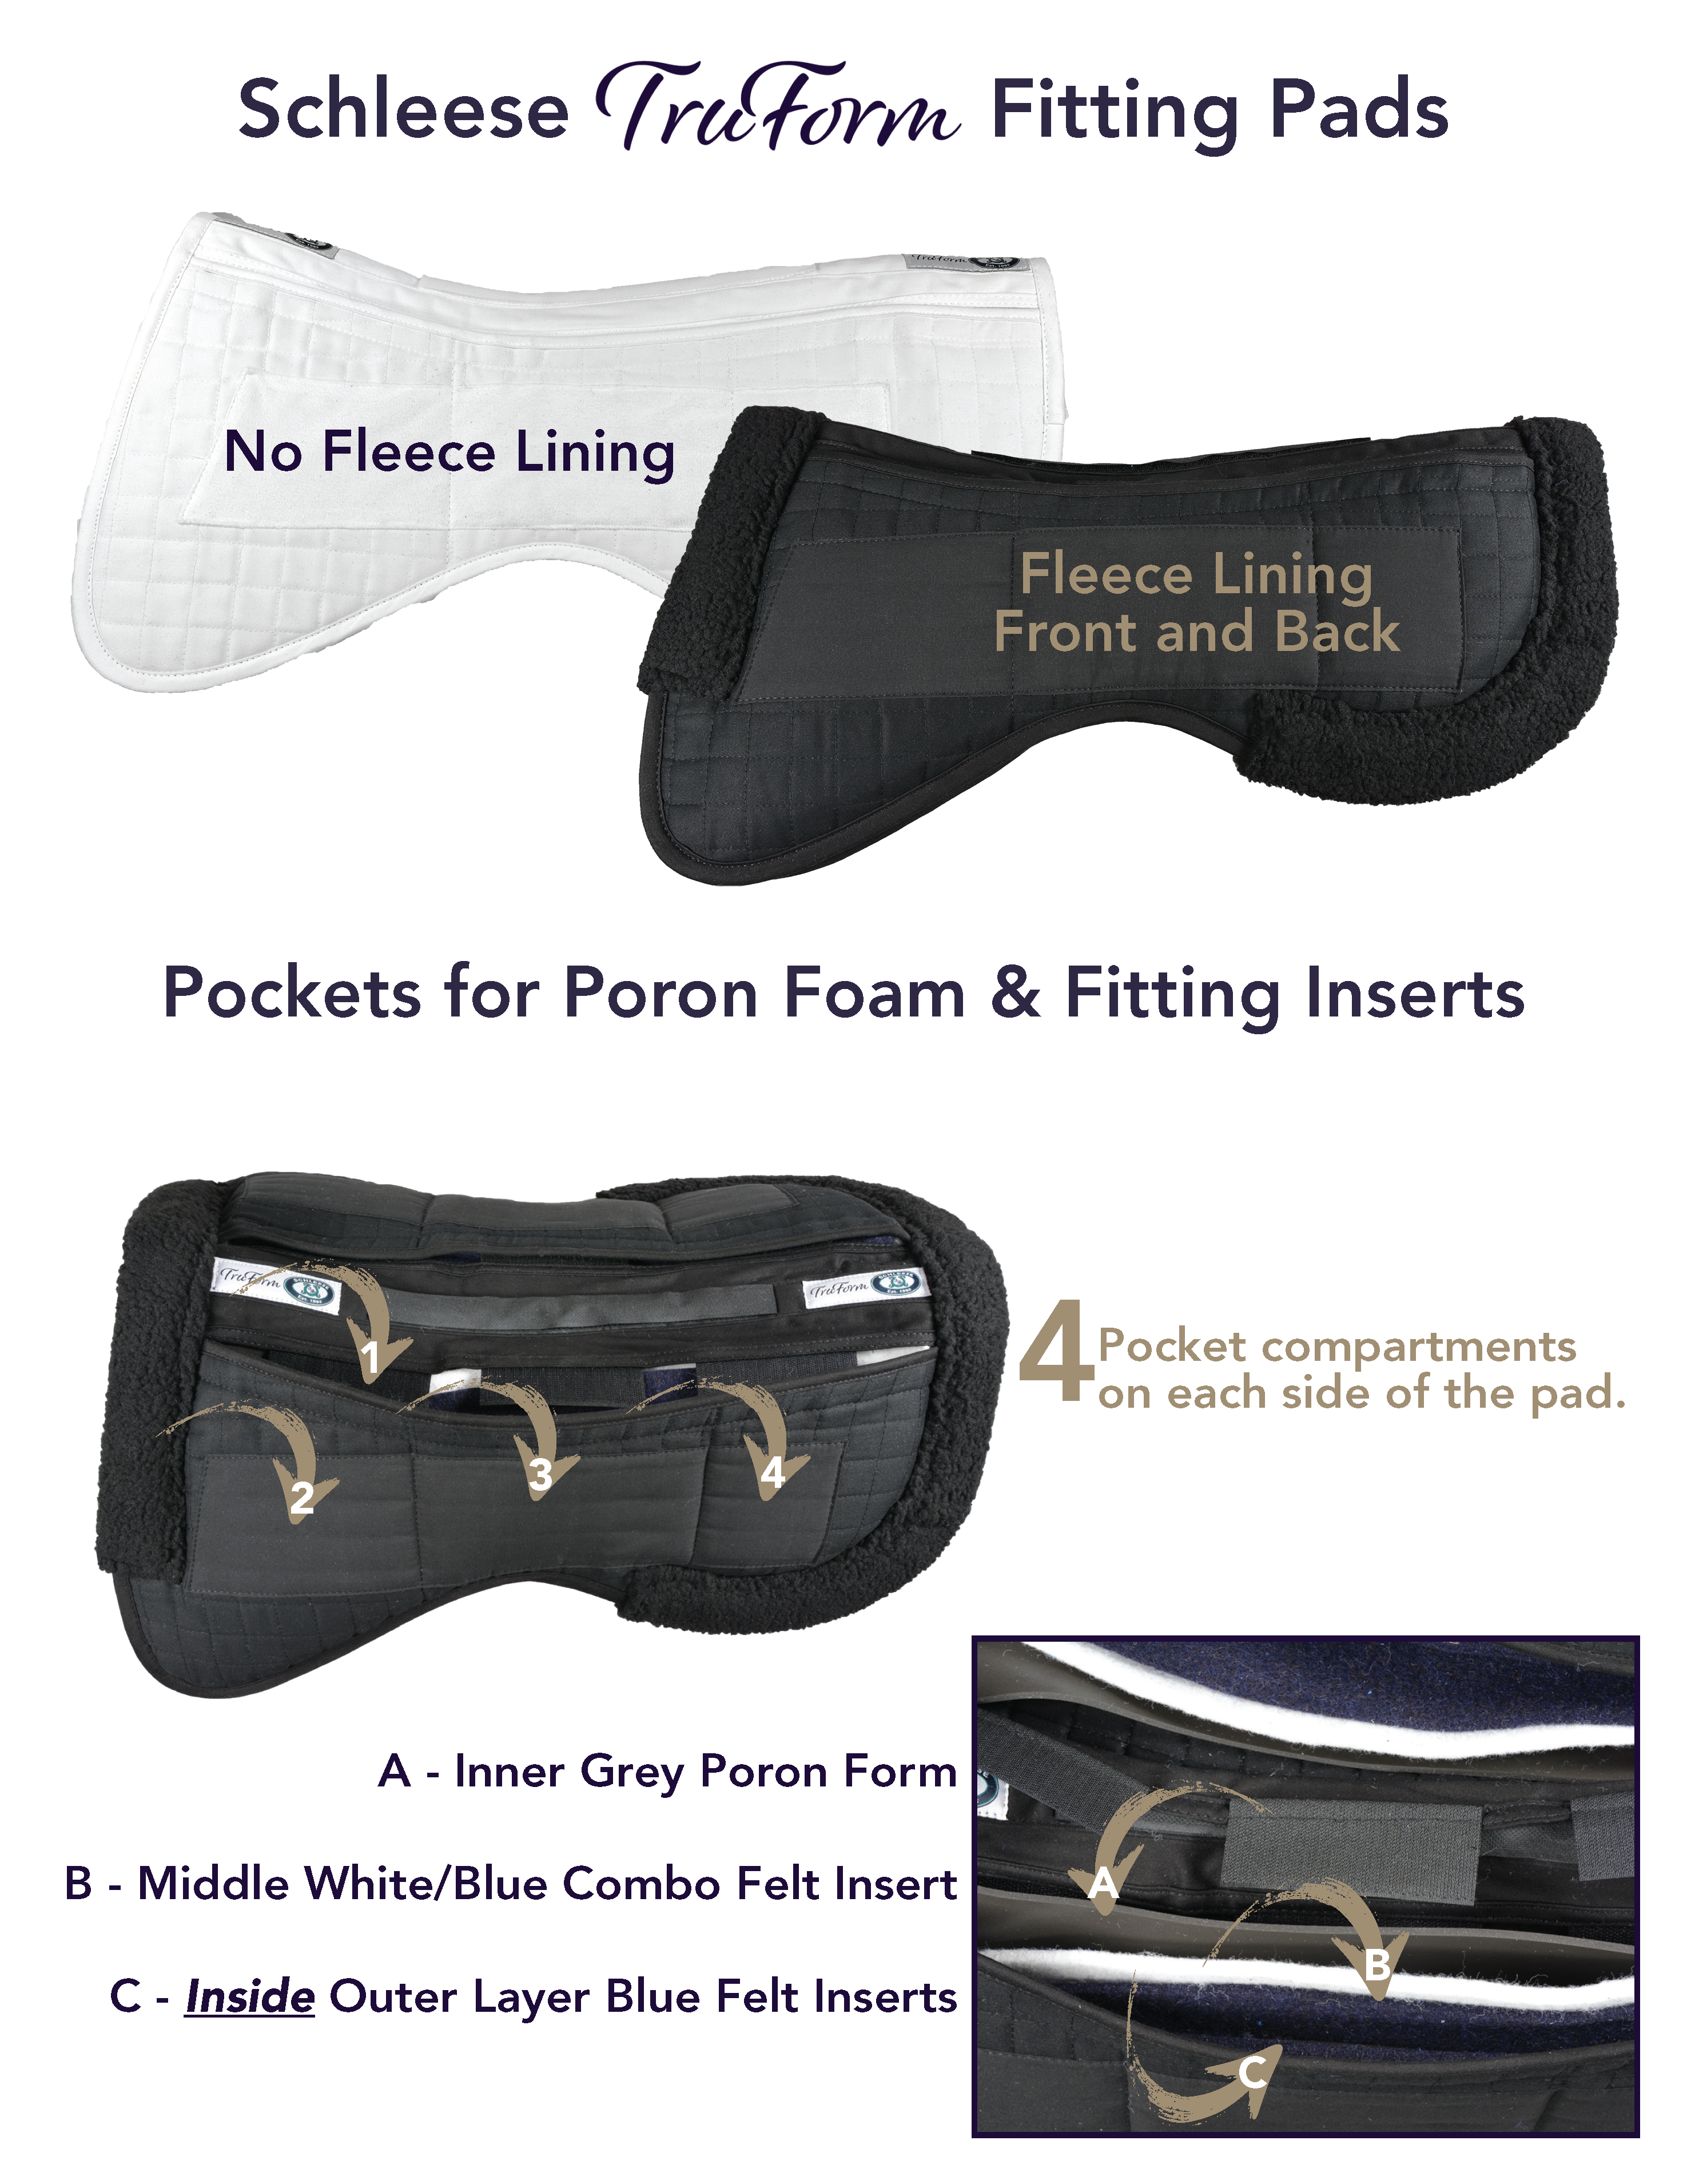 TruForm Fitting Pad • Schleese